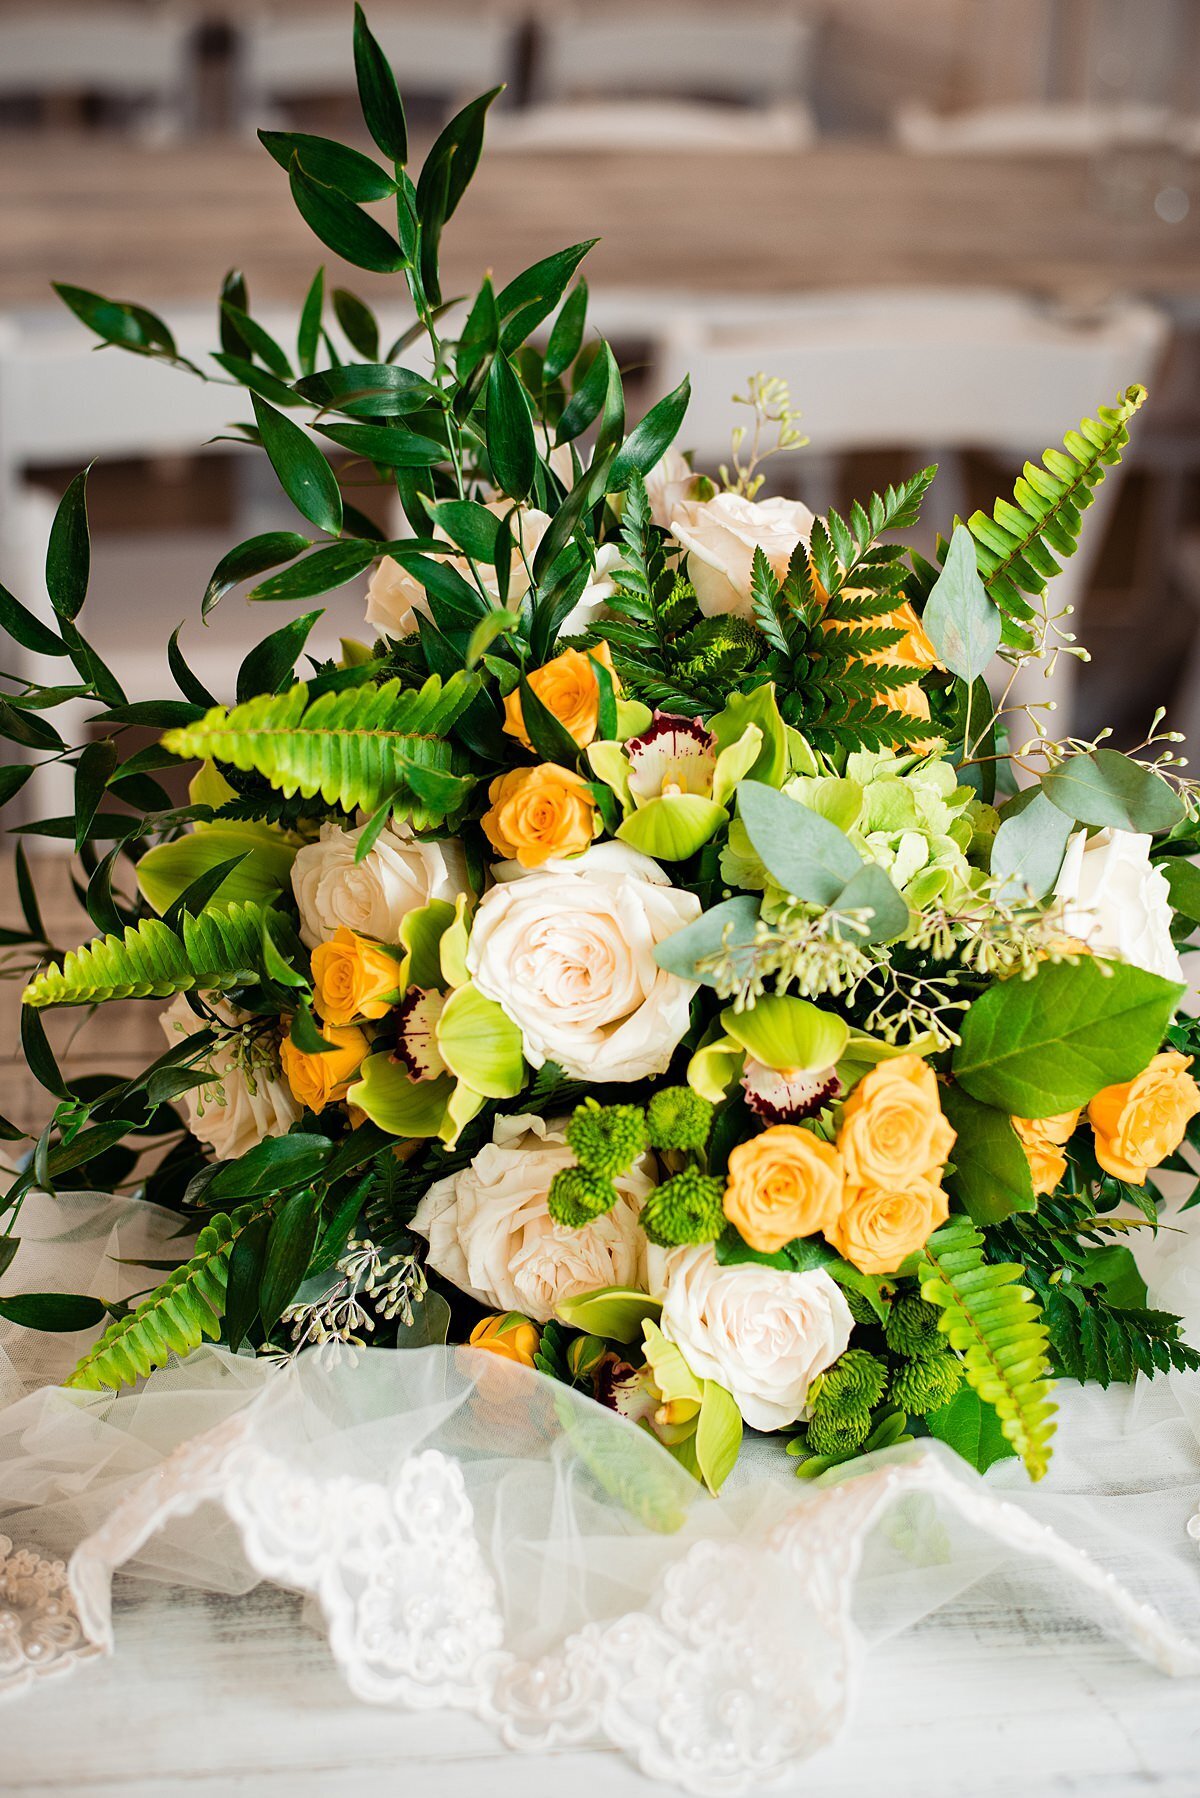 A large cascade bridal bouquet  with white roses, yellow tea roses, fern and greenery sits on a table with the bridal veil edges in lace.